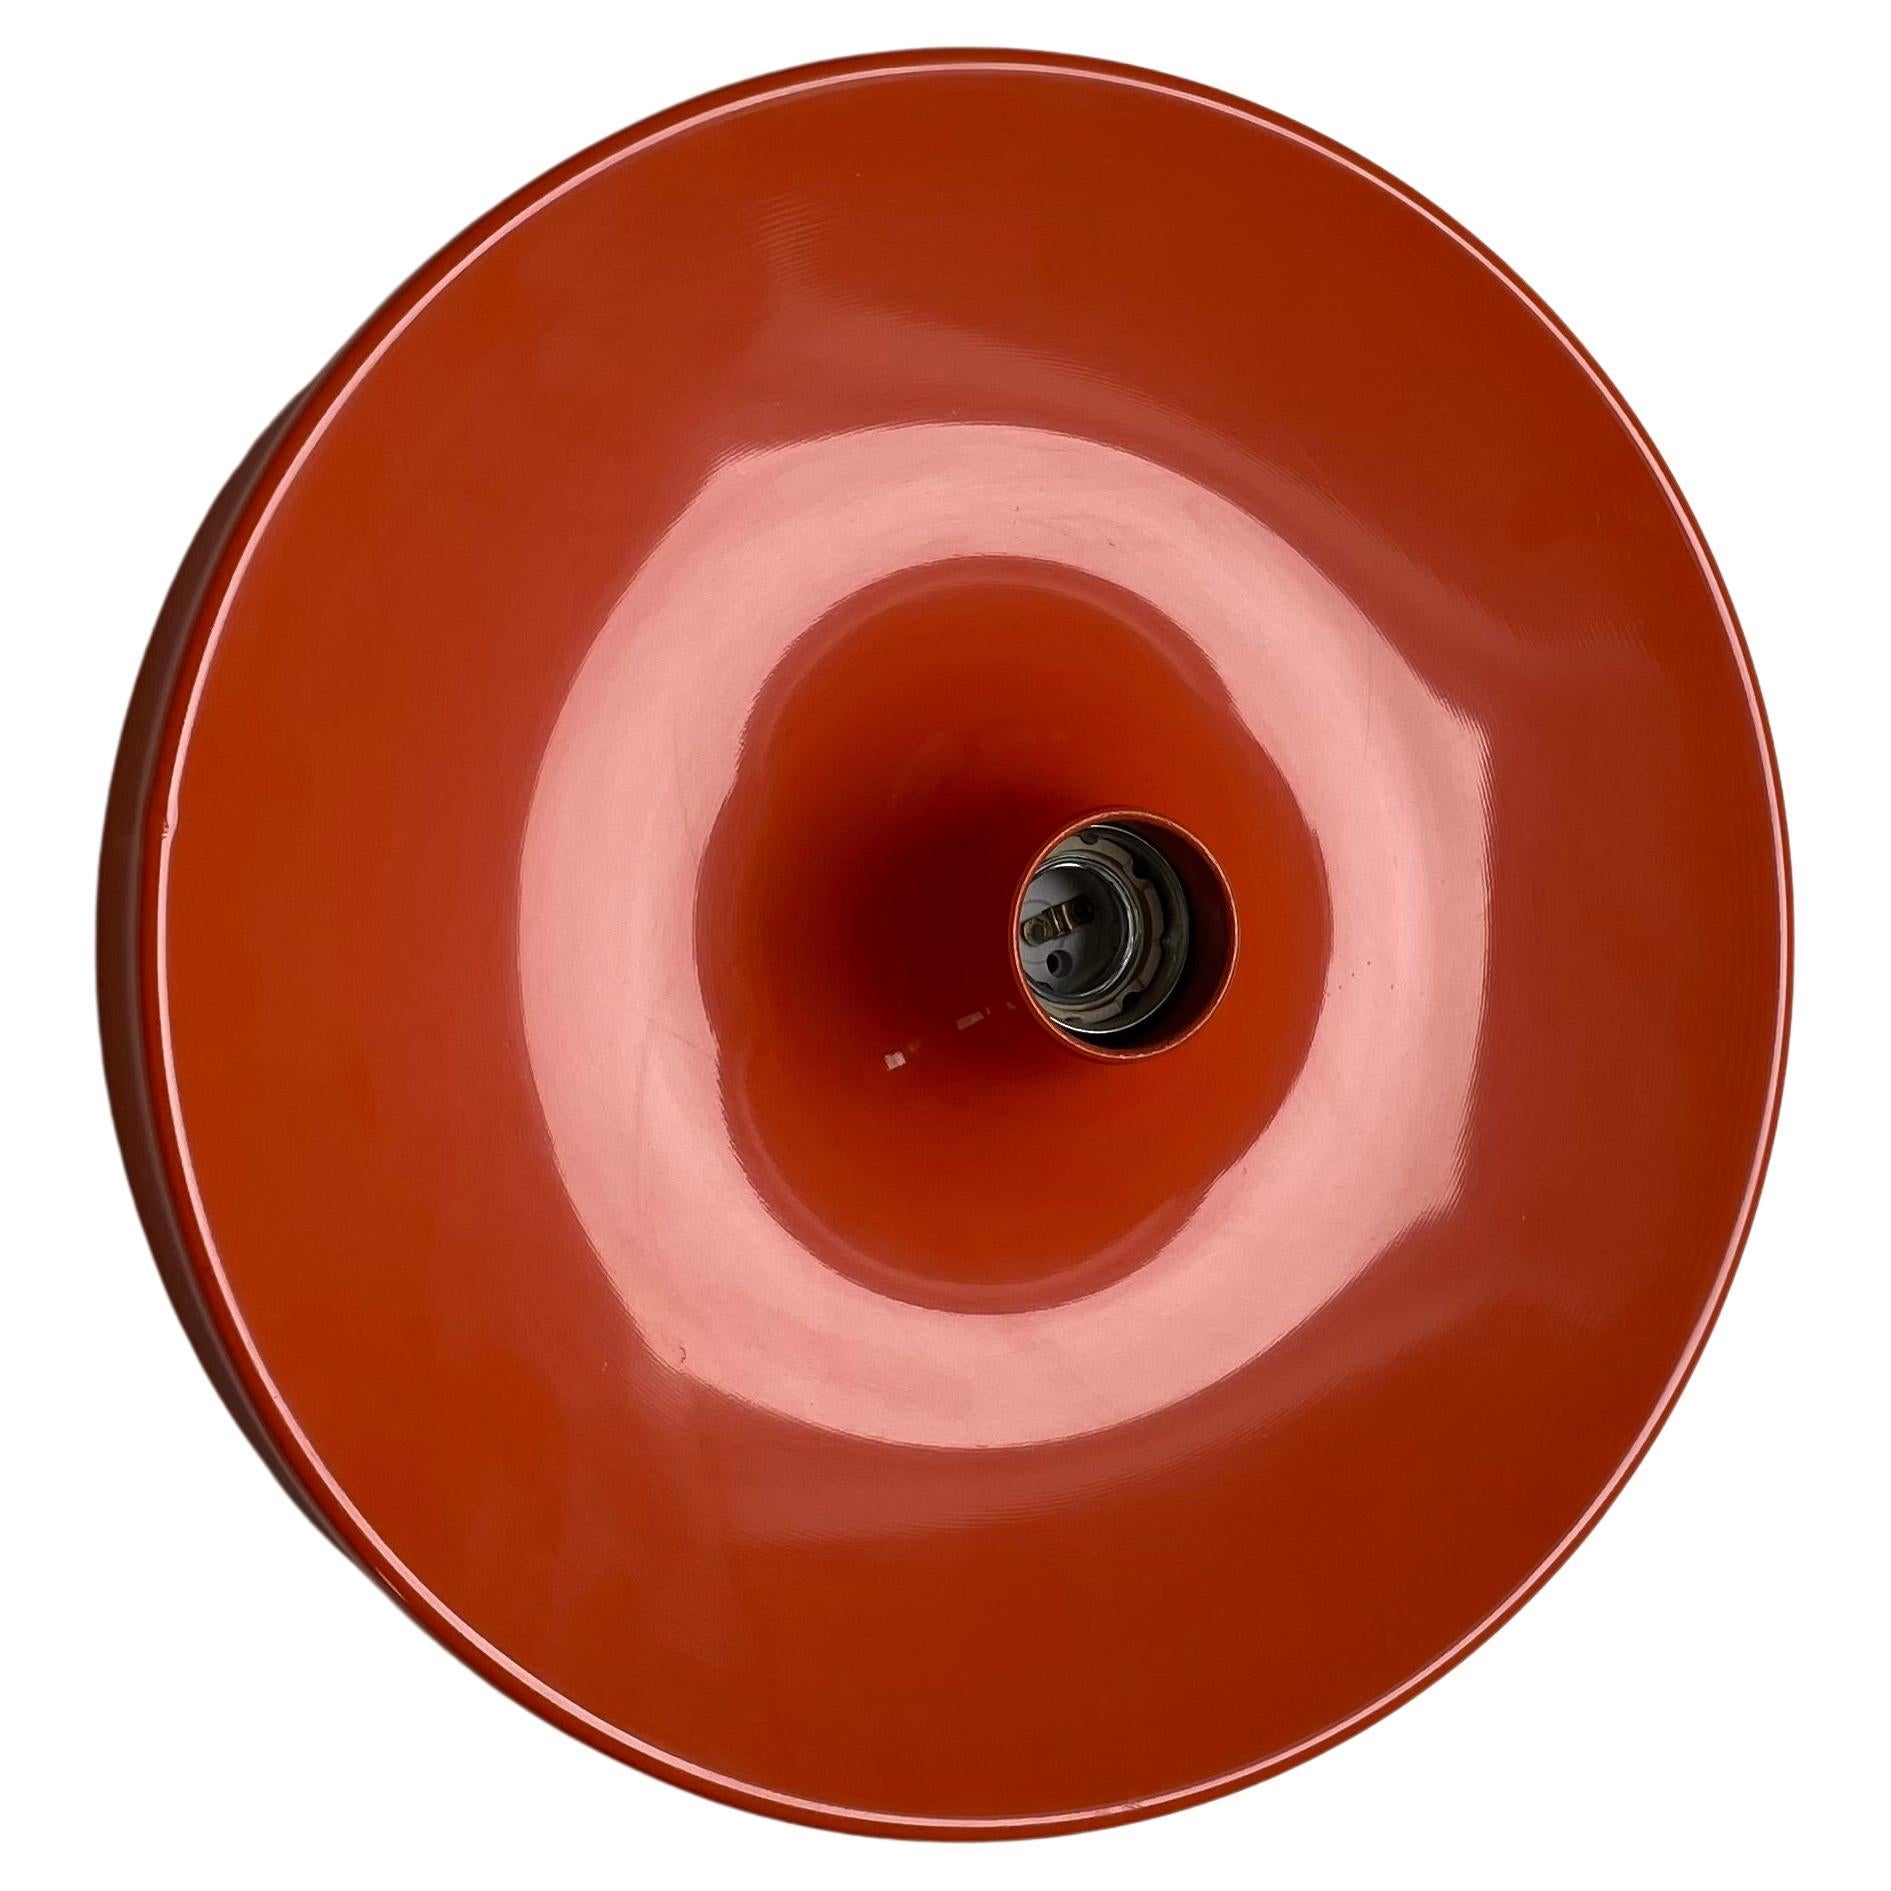 Rare orange 34cm Charlotte Perriand Style Disc Wall Light by Staff, Germany 1970